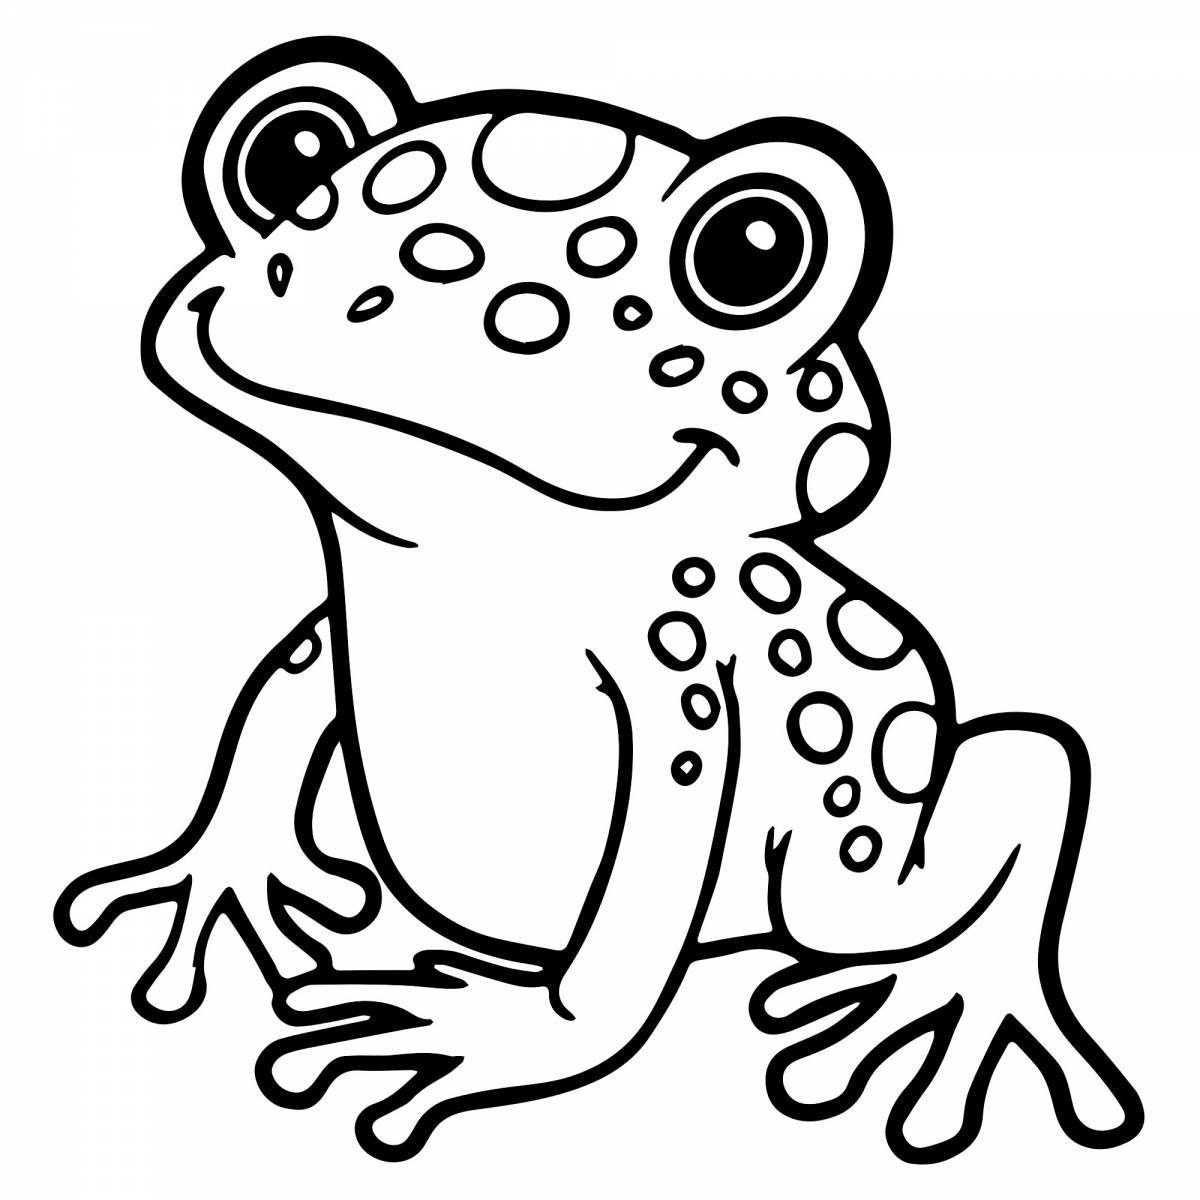 Charming toad coloring page